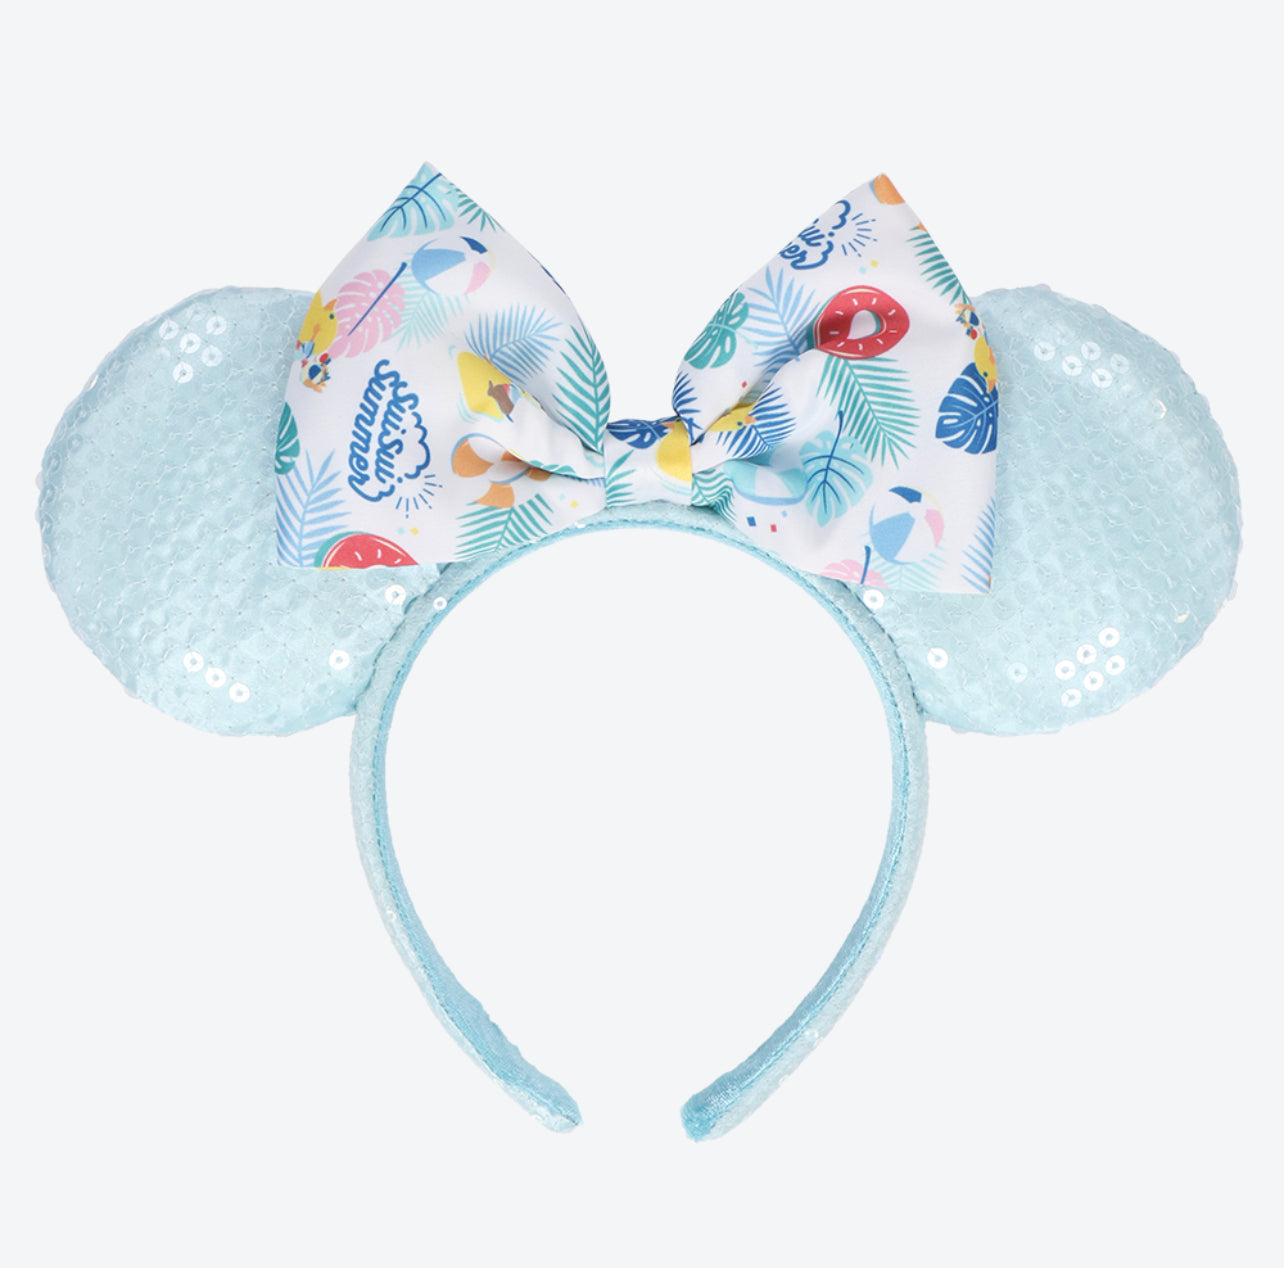 TDR - SUISUI SUMMER Collection x Minnie Mouse Sequin Ear Headband